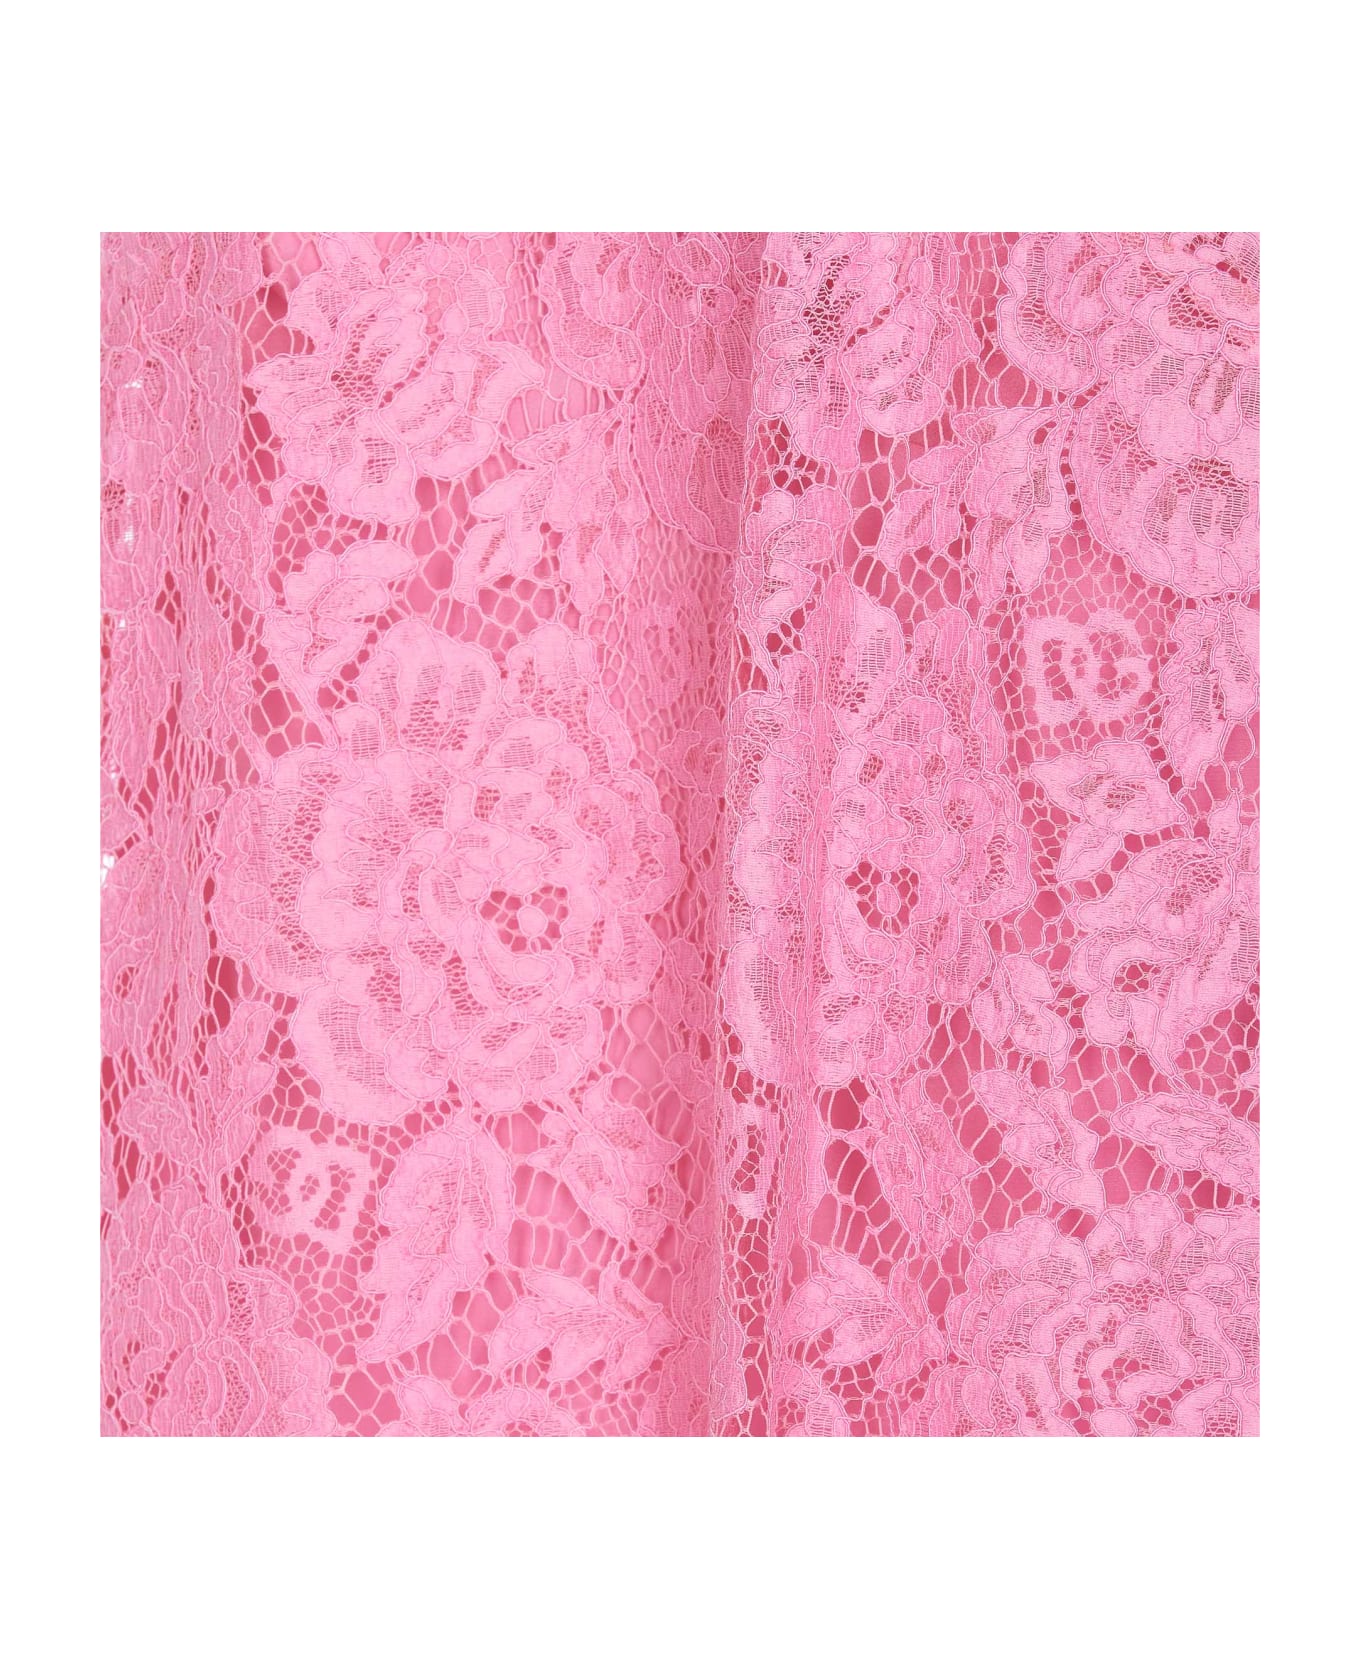 Dolce & Gabbana Cordonetto Lace Top - Pink トップス